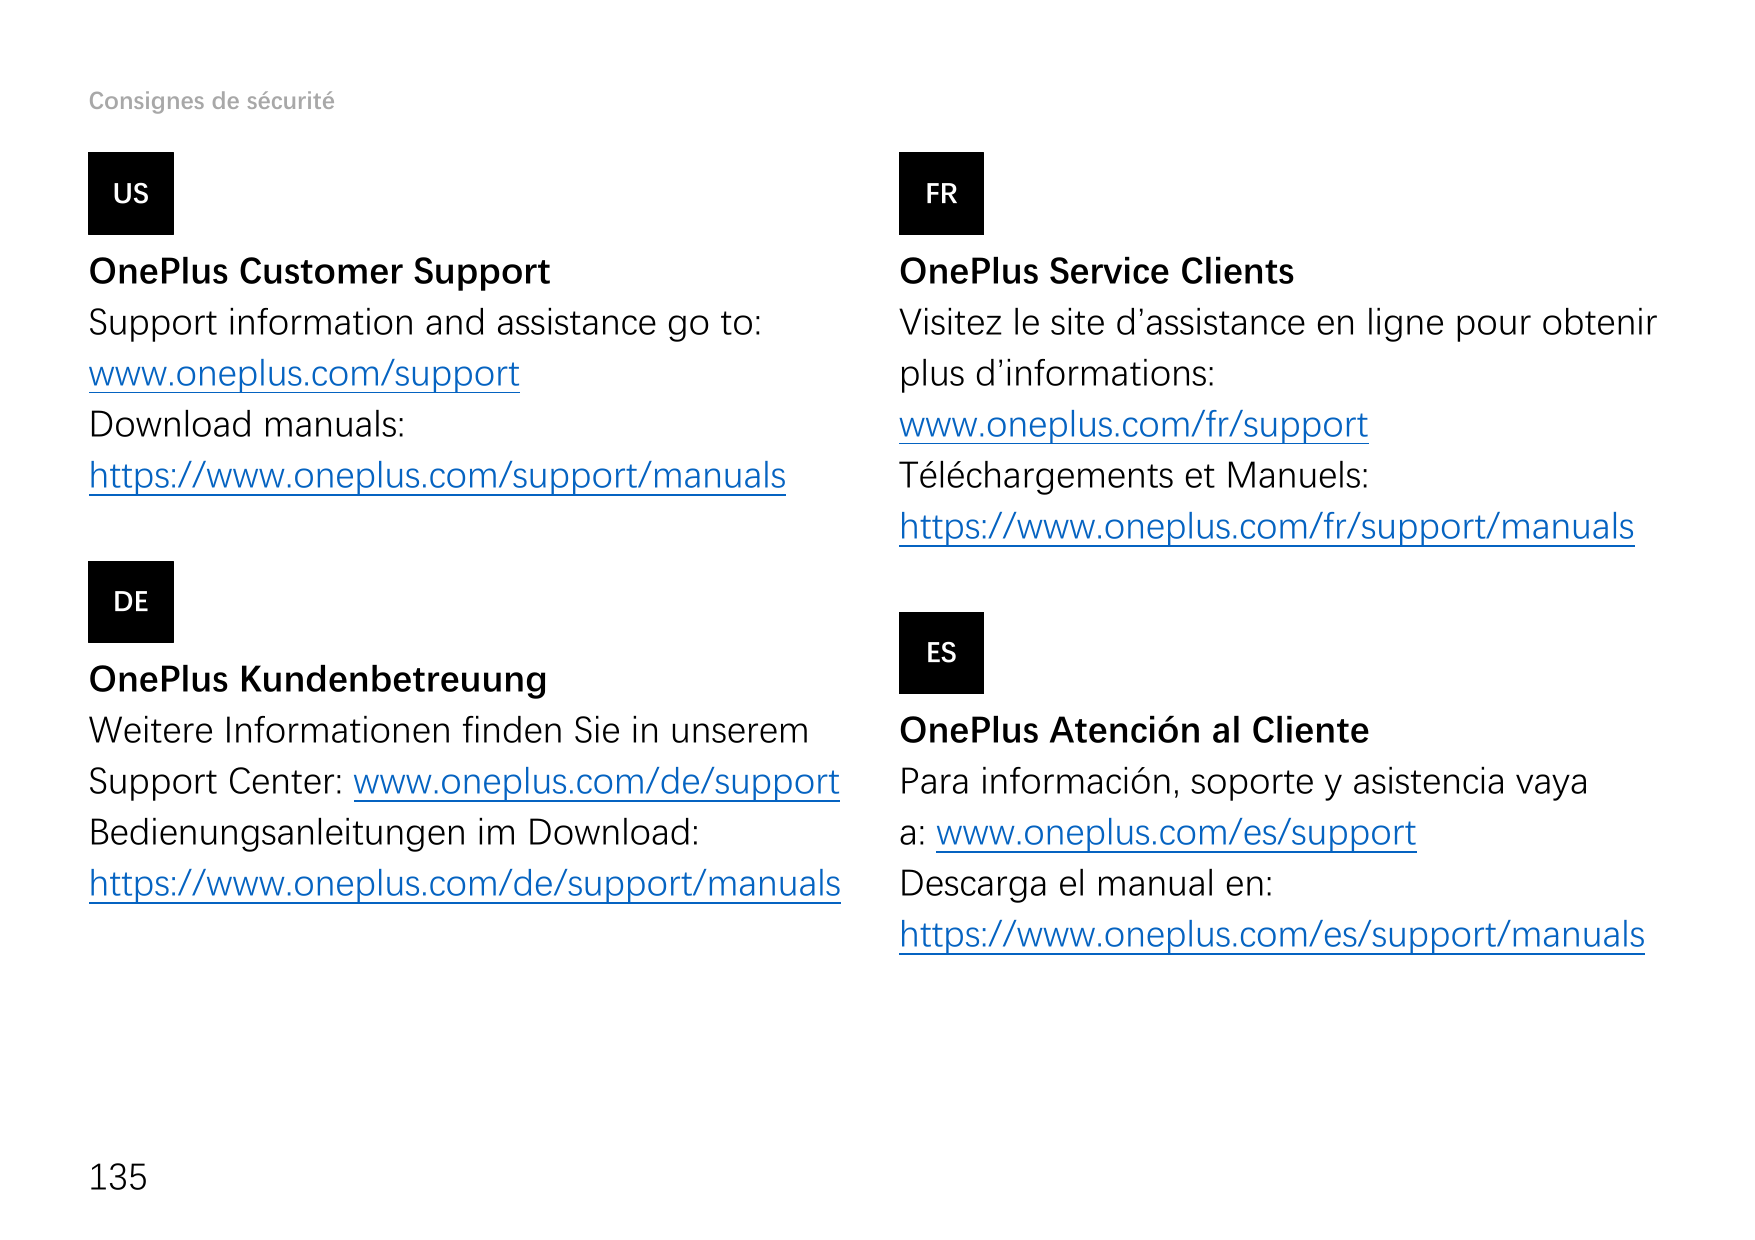 Consignes de sécuritéUSOnePlus Customer SupportSupport information and assistance go to:www.oneplus.com/supportDownload manuals: